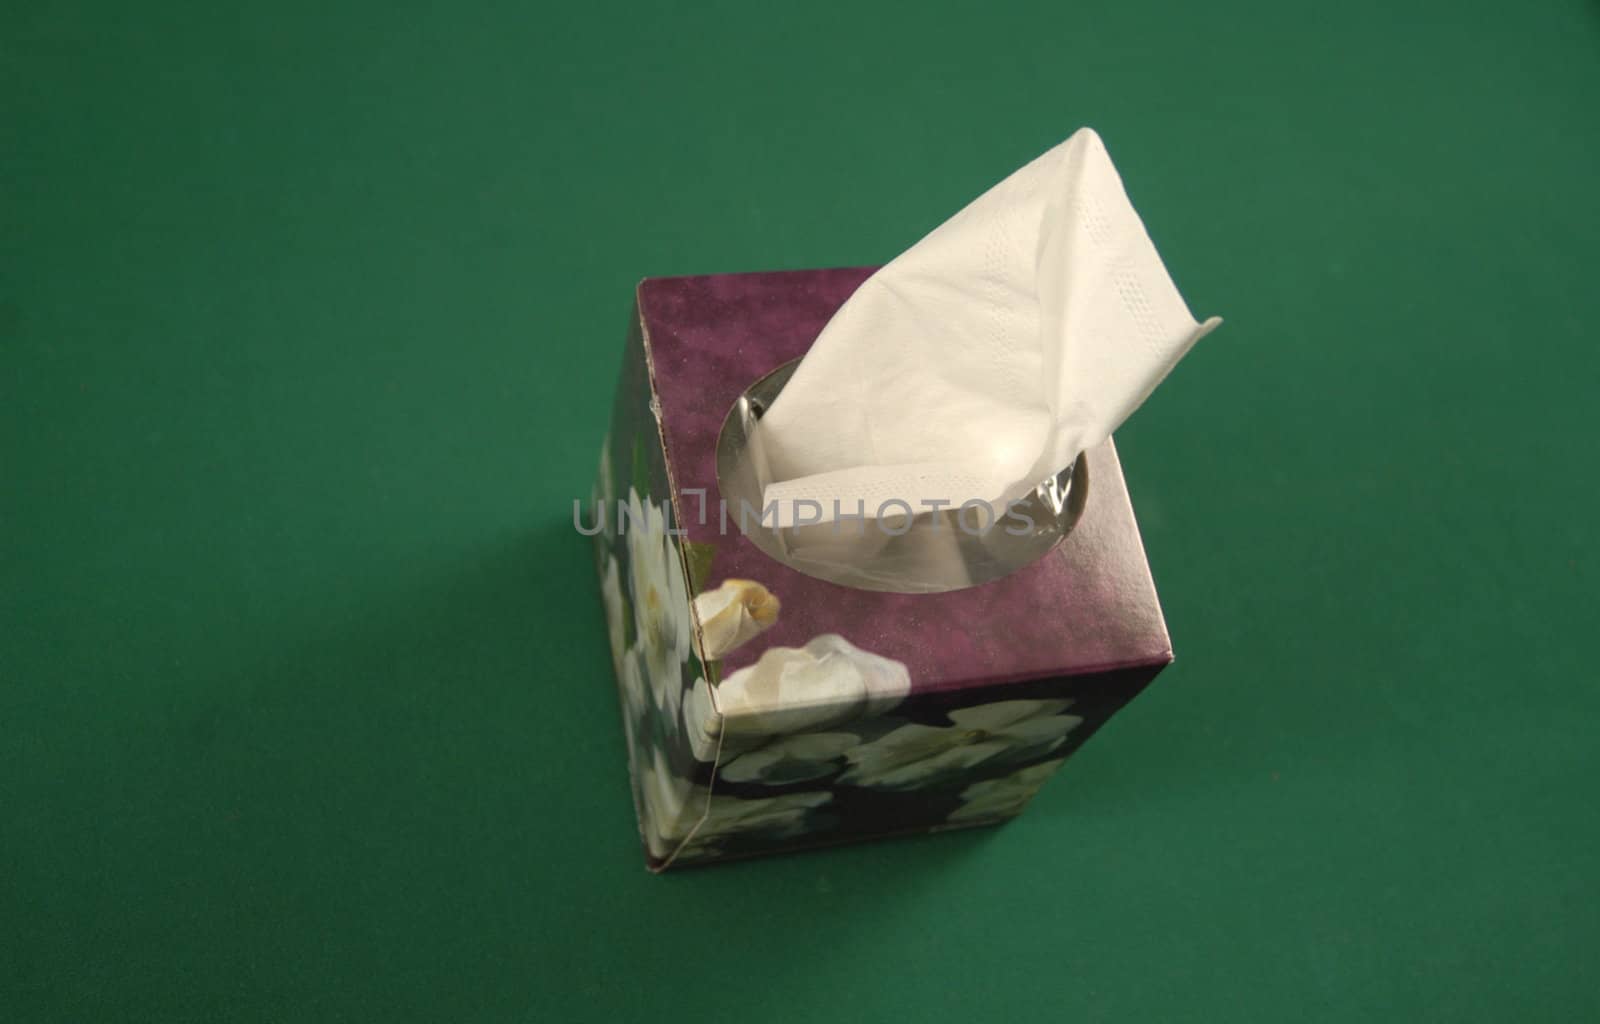 A box of tissues seen from a top view